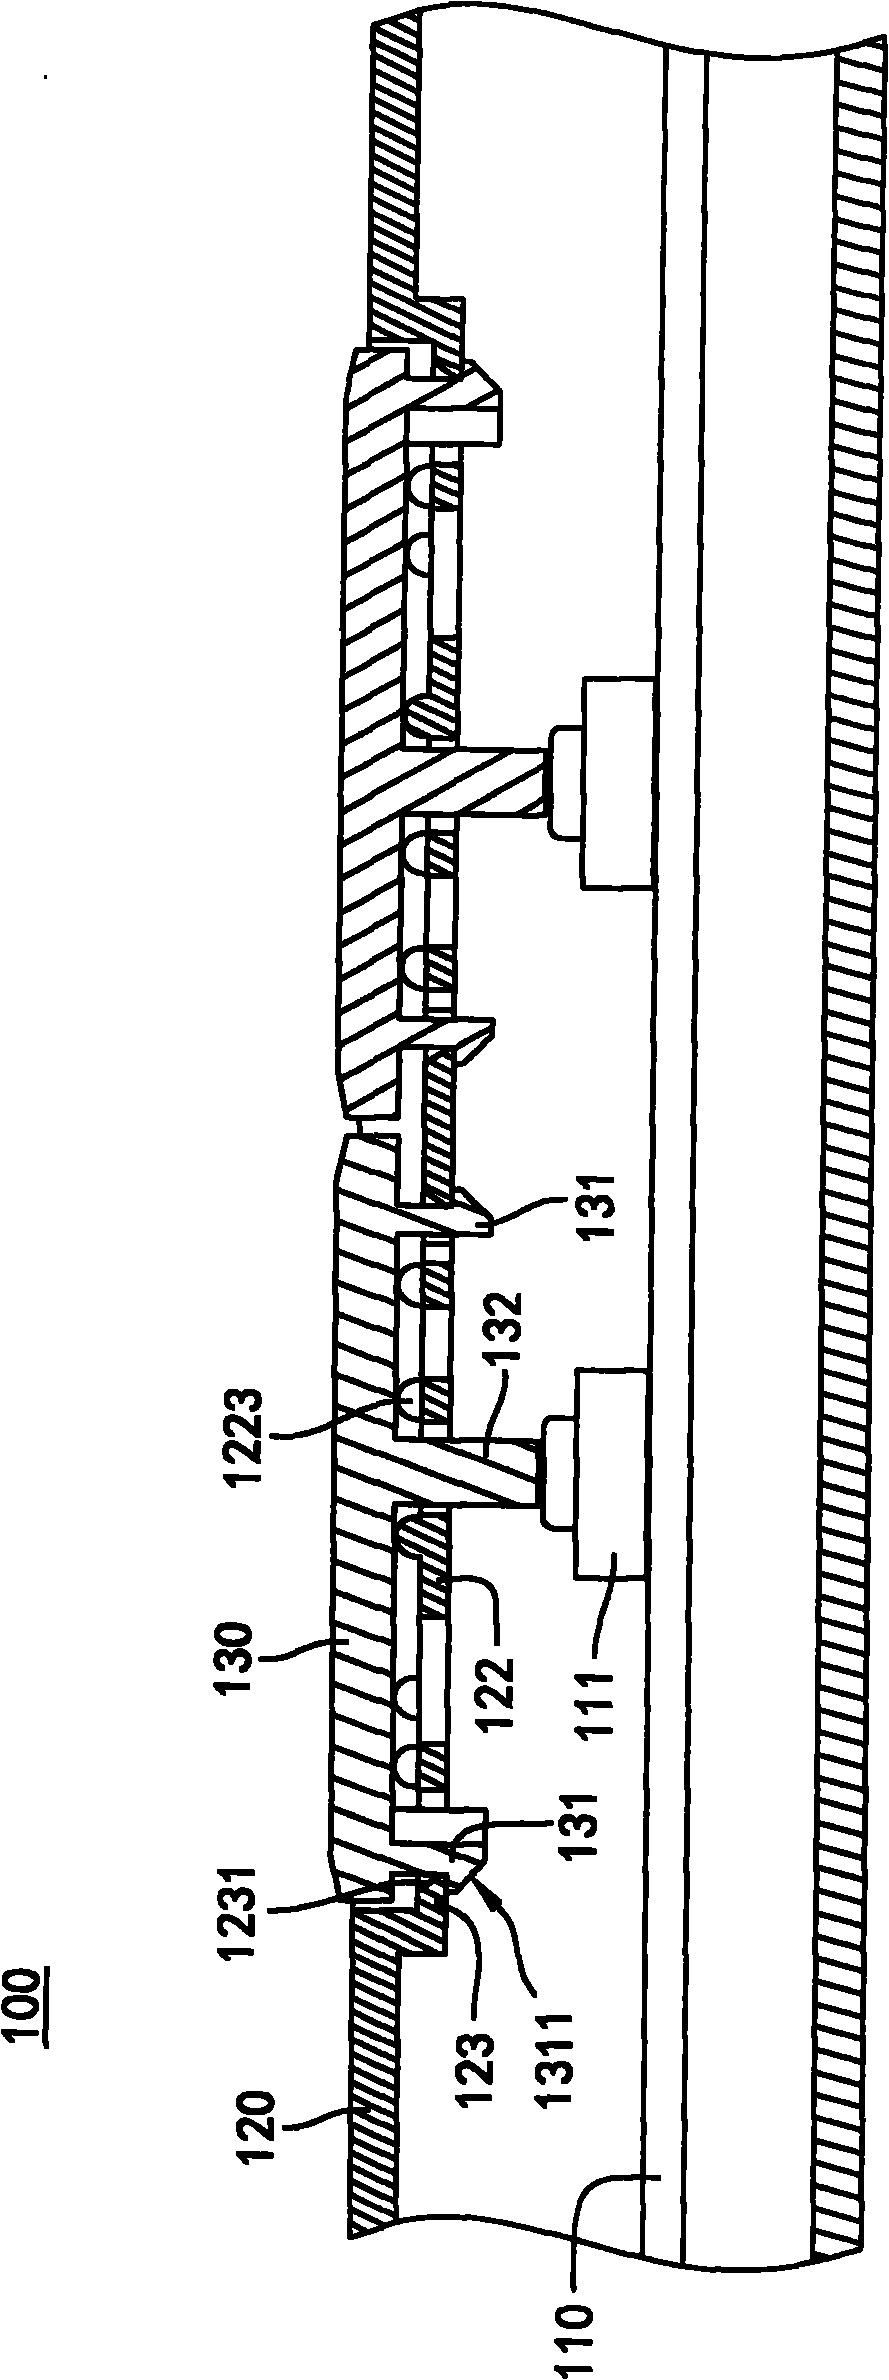 Housing structure of an electronic device